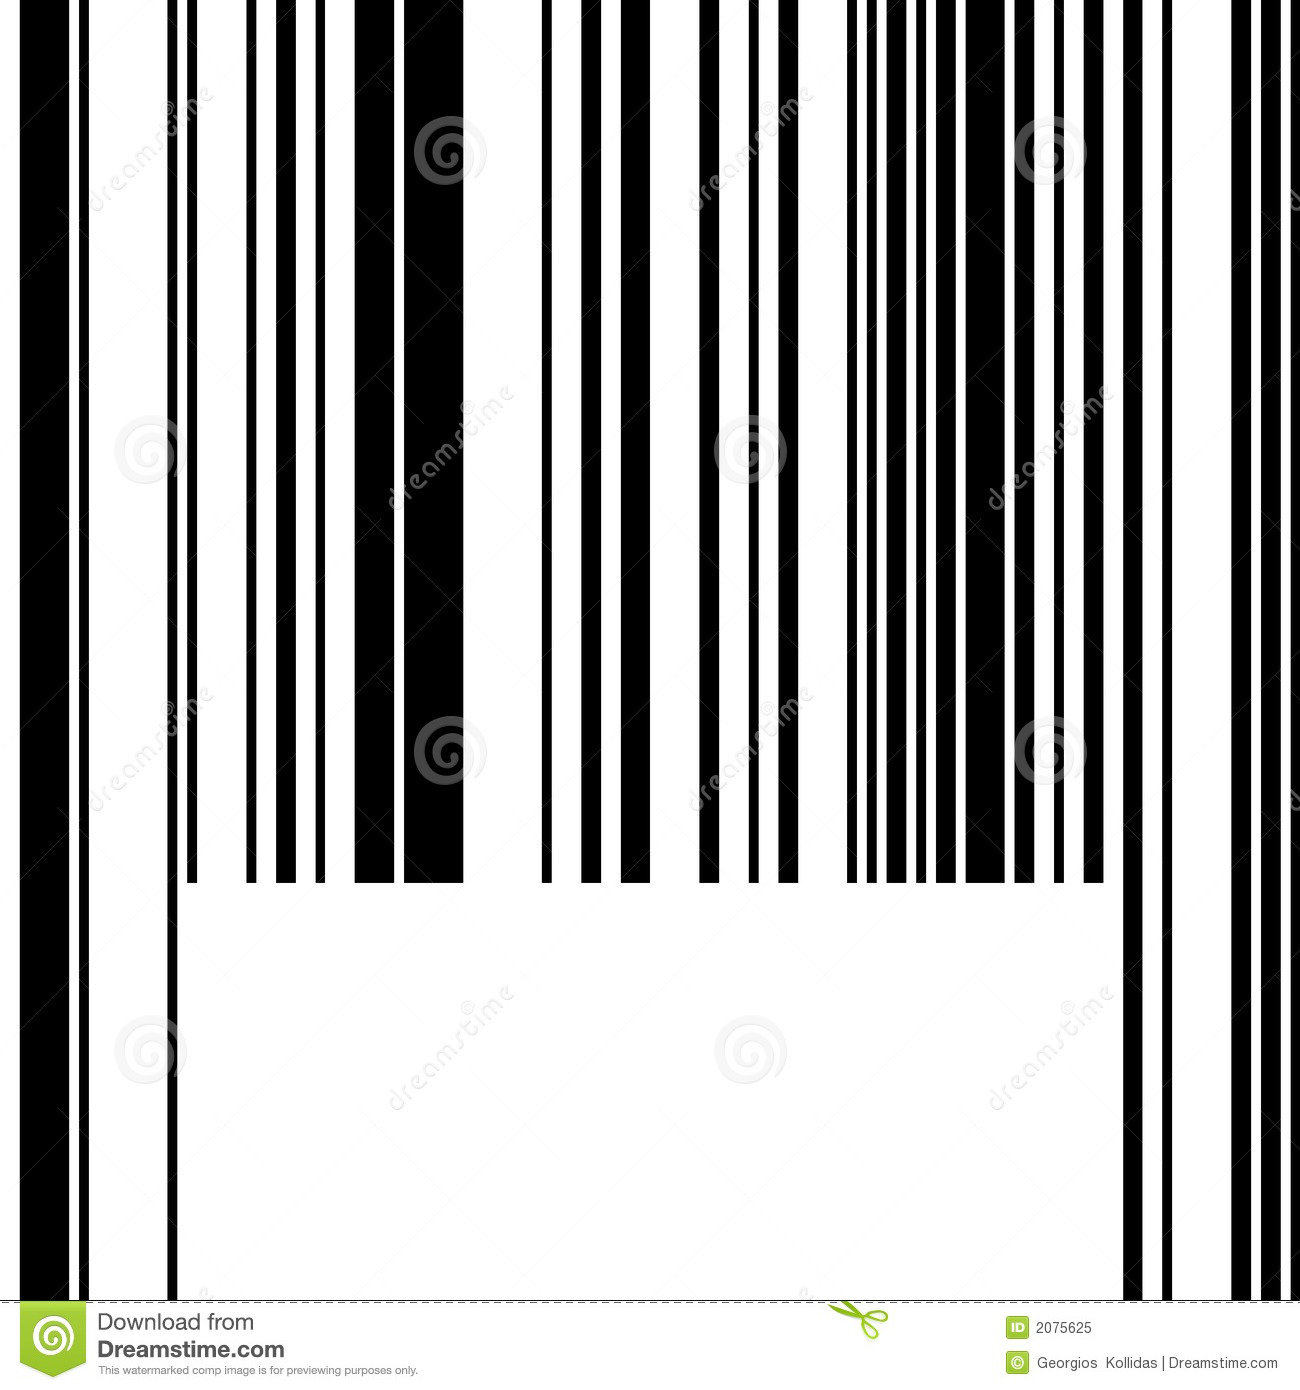 Common Barcode But Emty Without Numbers So You Can Add Whatever